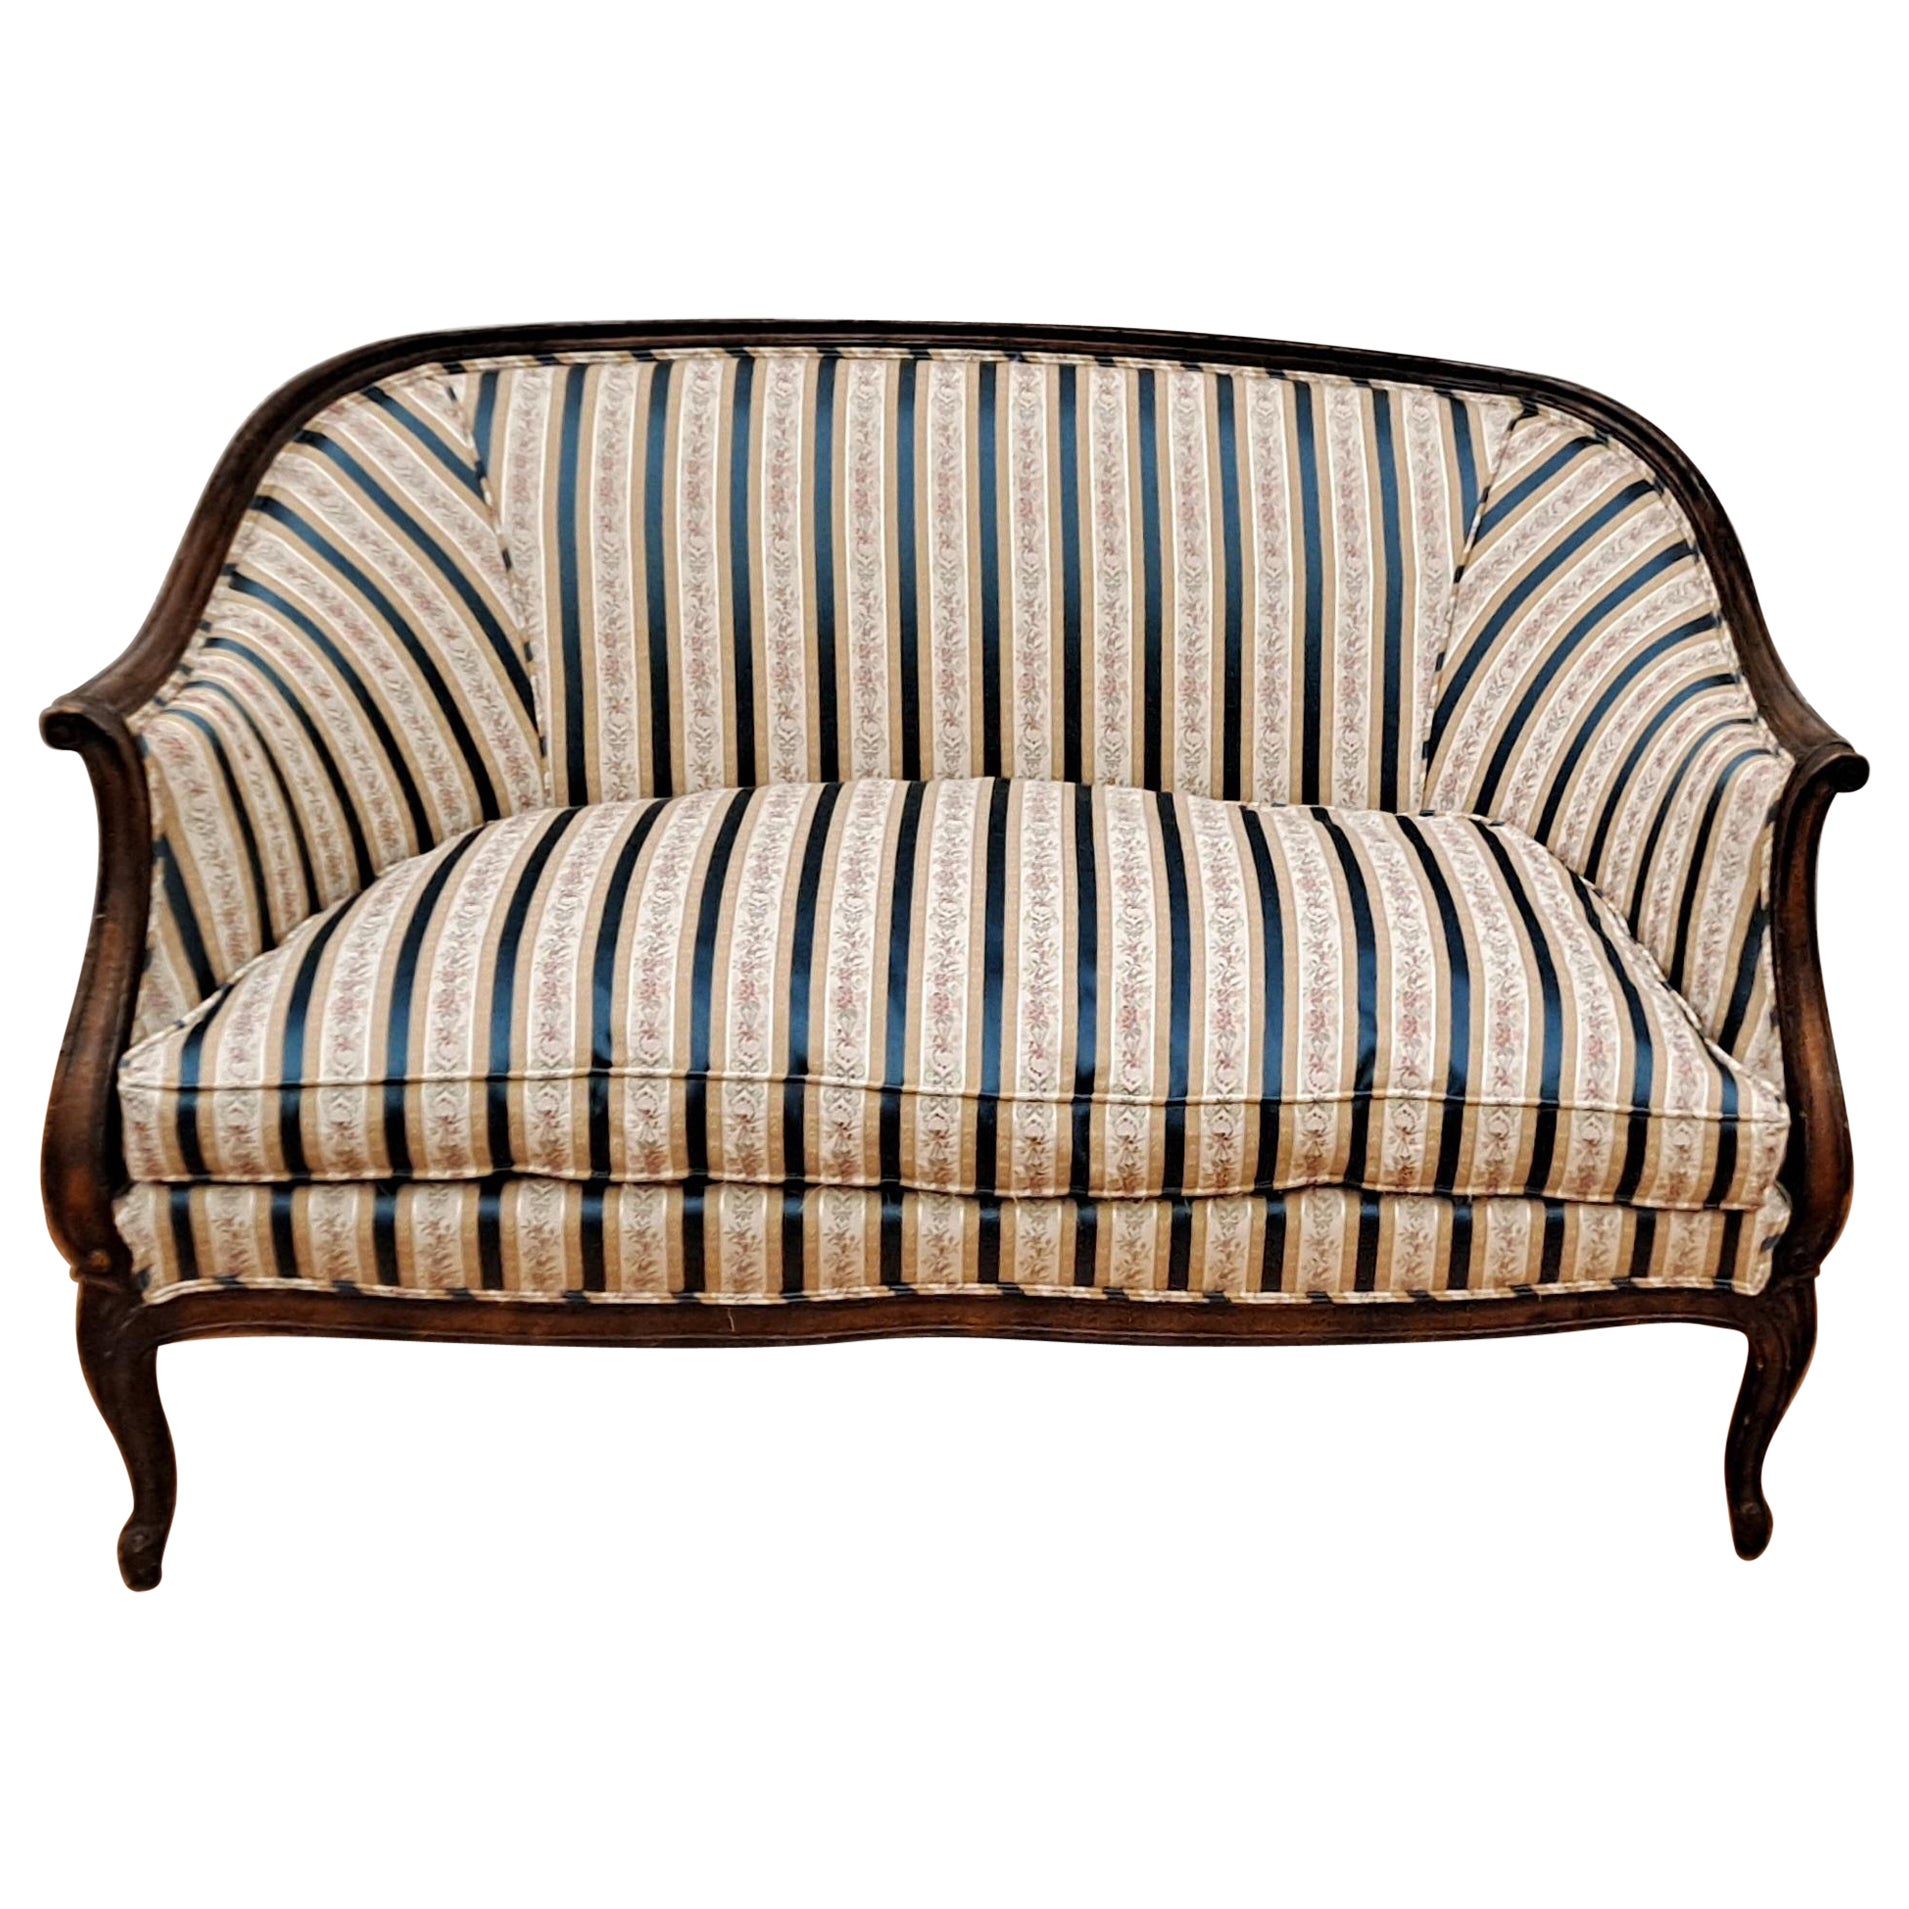 Early 20th Century French Provincial Style Sofa  